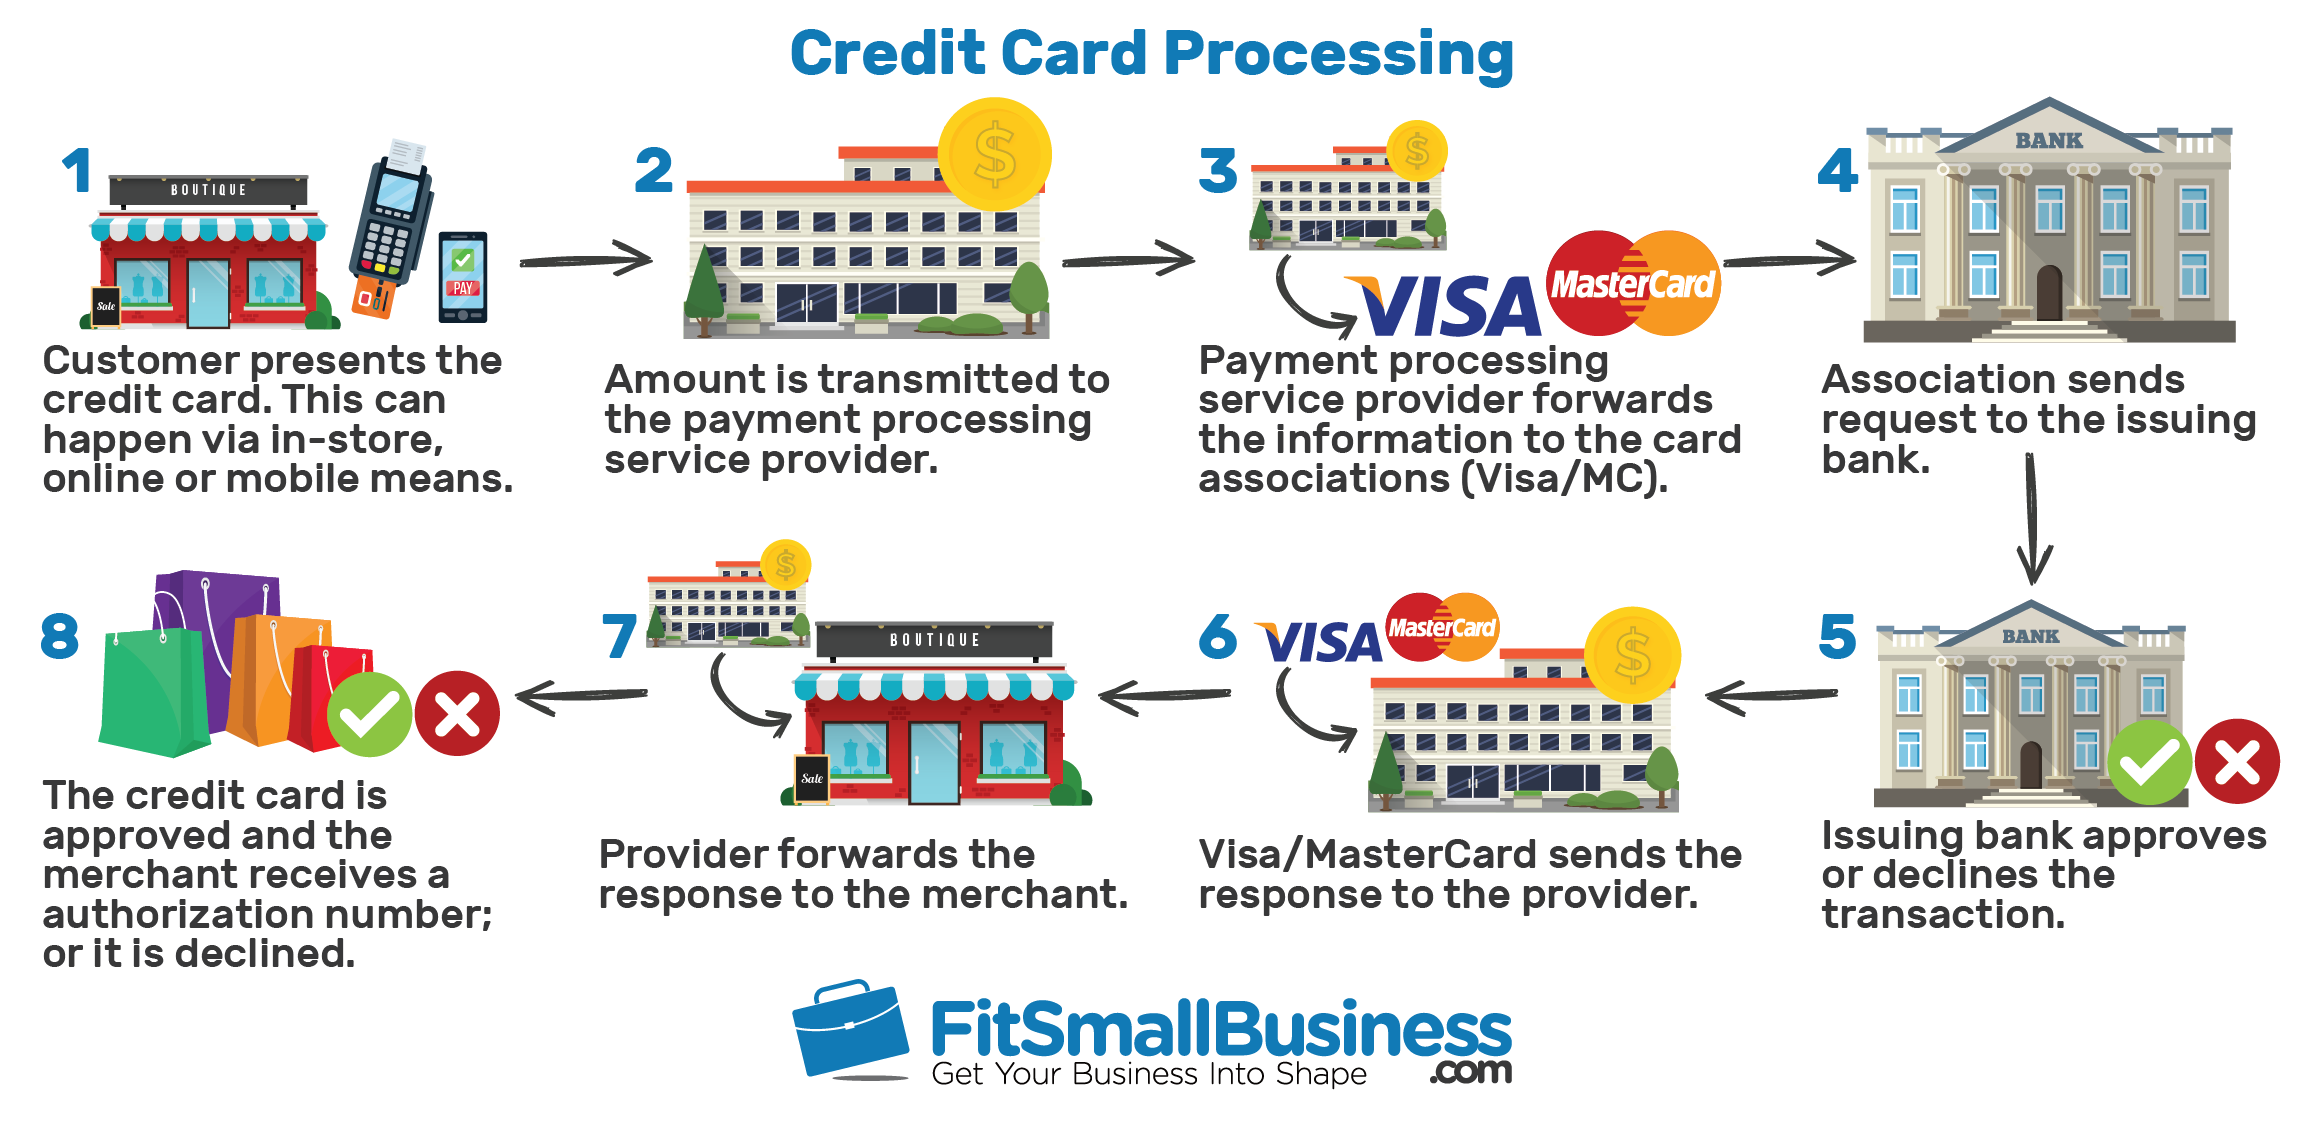 Credit Card Processing Fees And Rates Explained - Riset